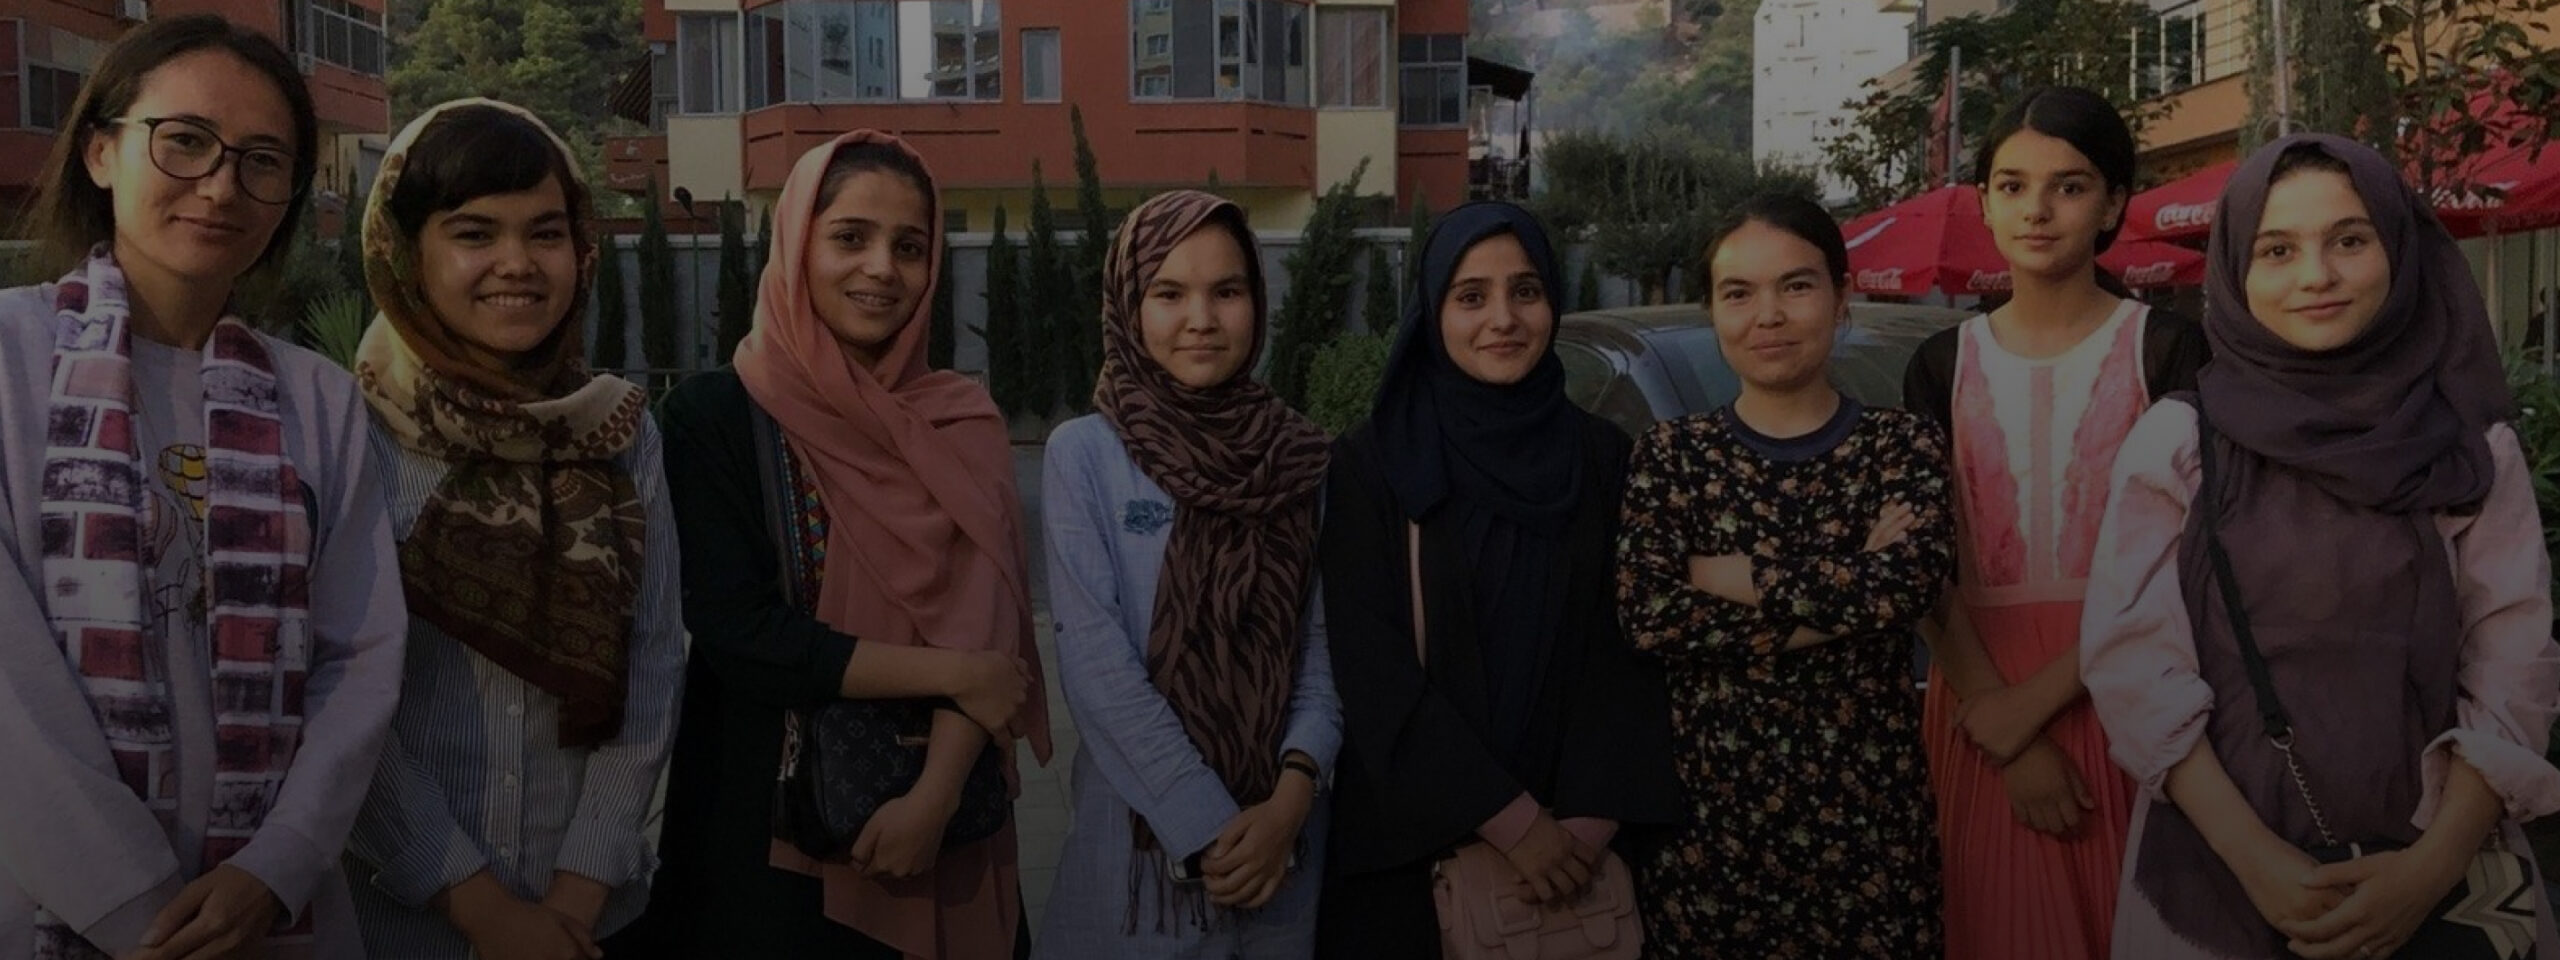 Group of women with headscarves posing for camera